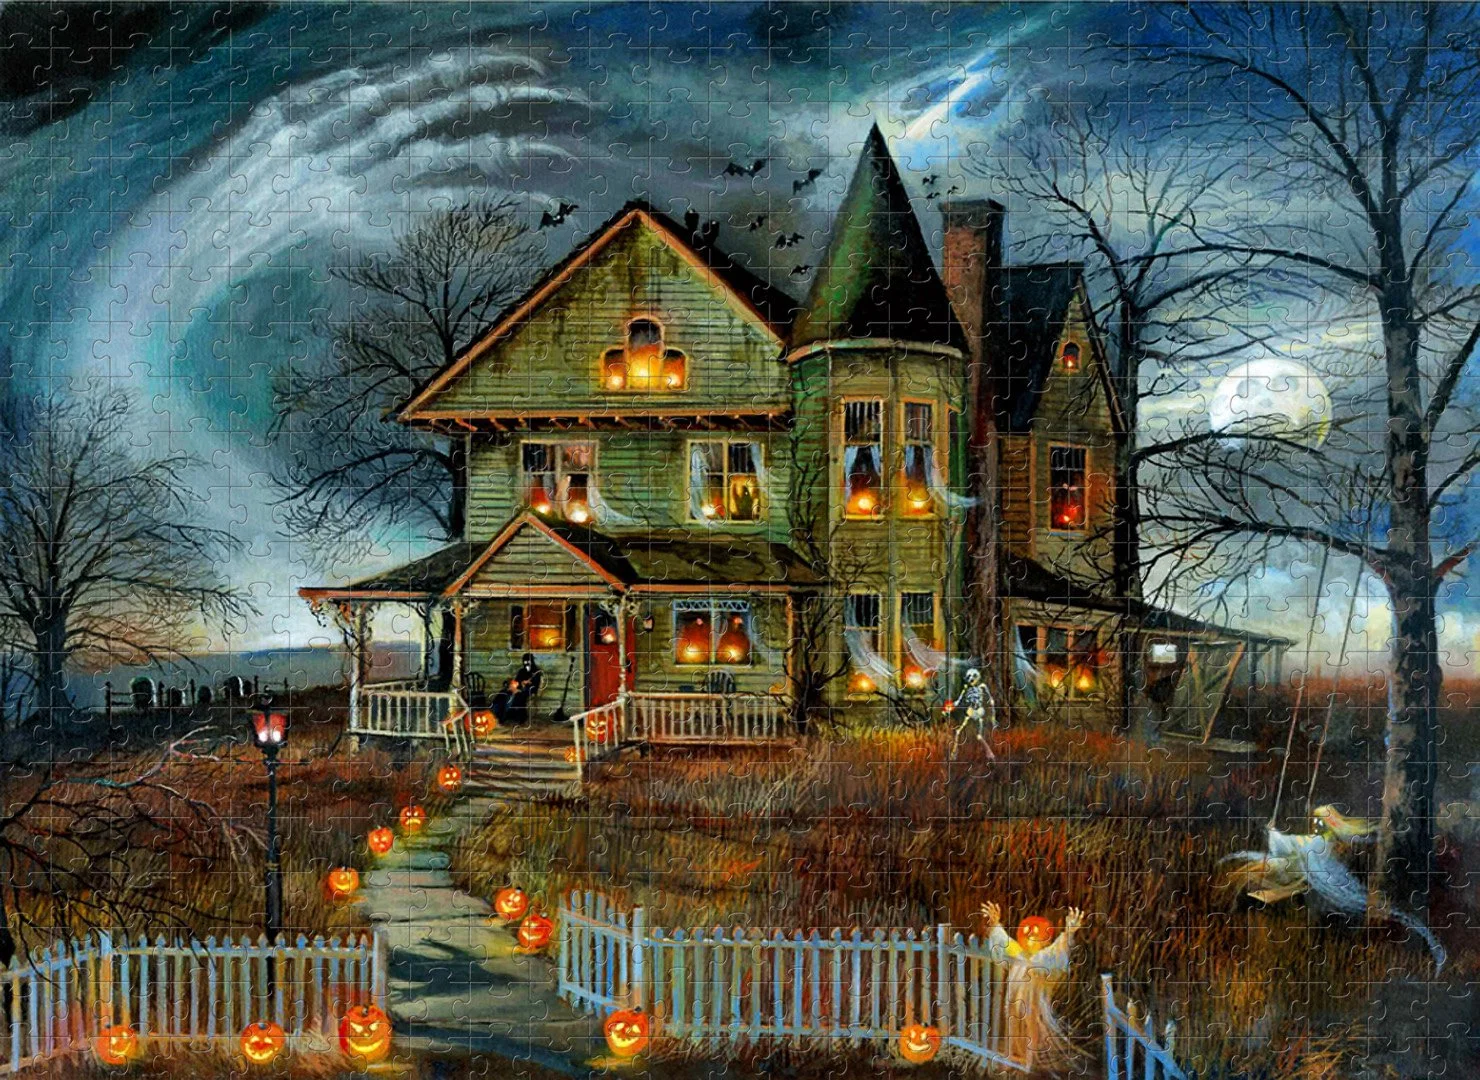 Halloween Haunted House Wholesale Intellectual Educational Kids Toys, Wooden 6000 Piece Jigsaw Puzzle Gifts Toy, Customisable Patterns and Sizes.